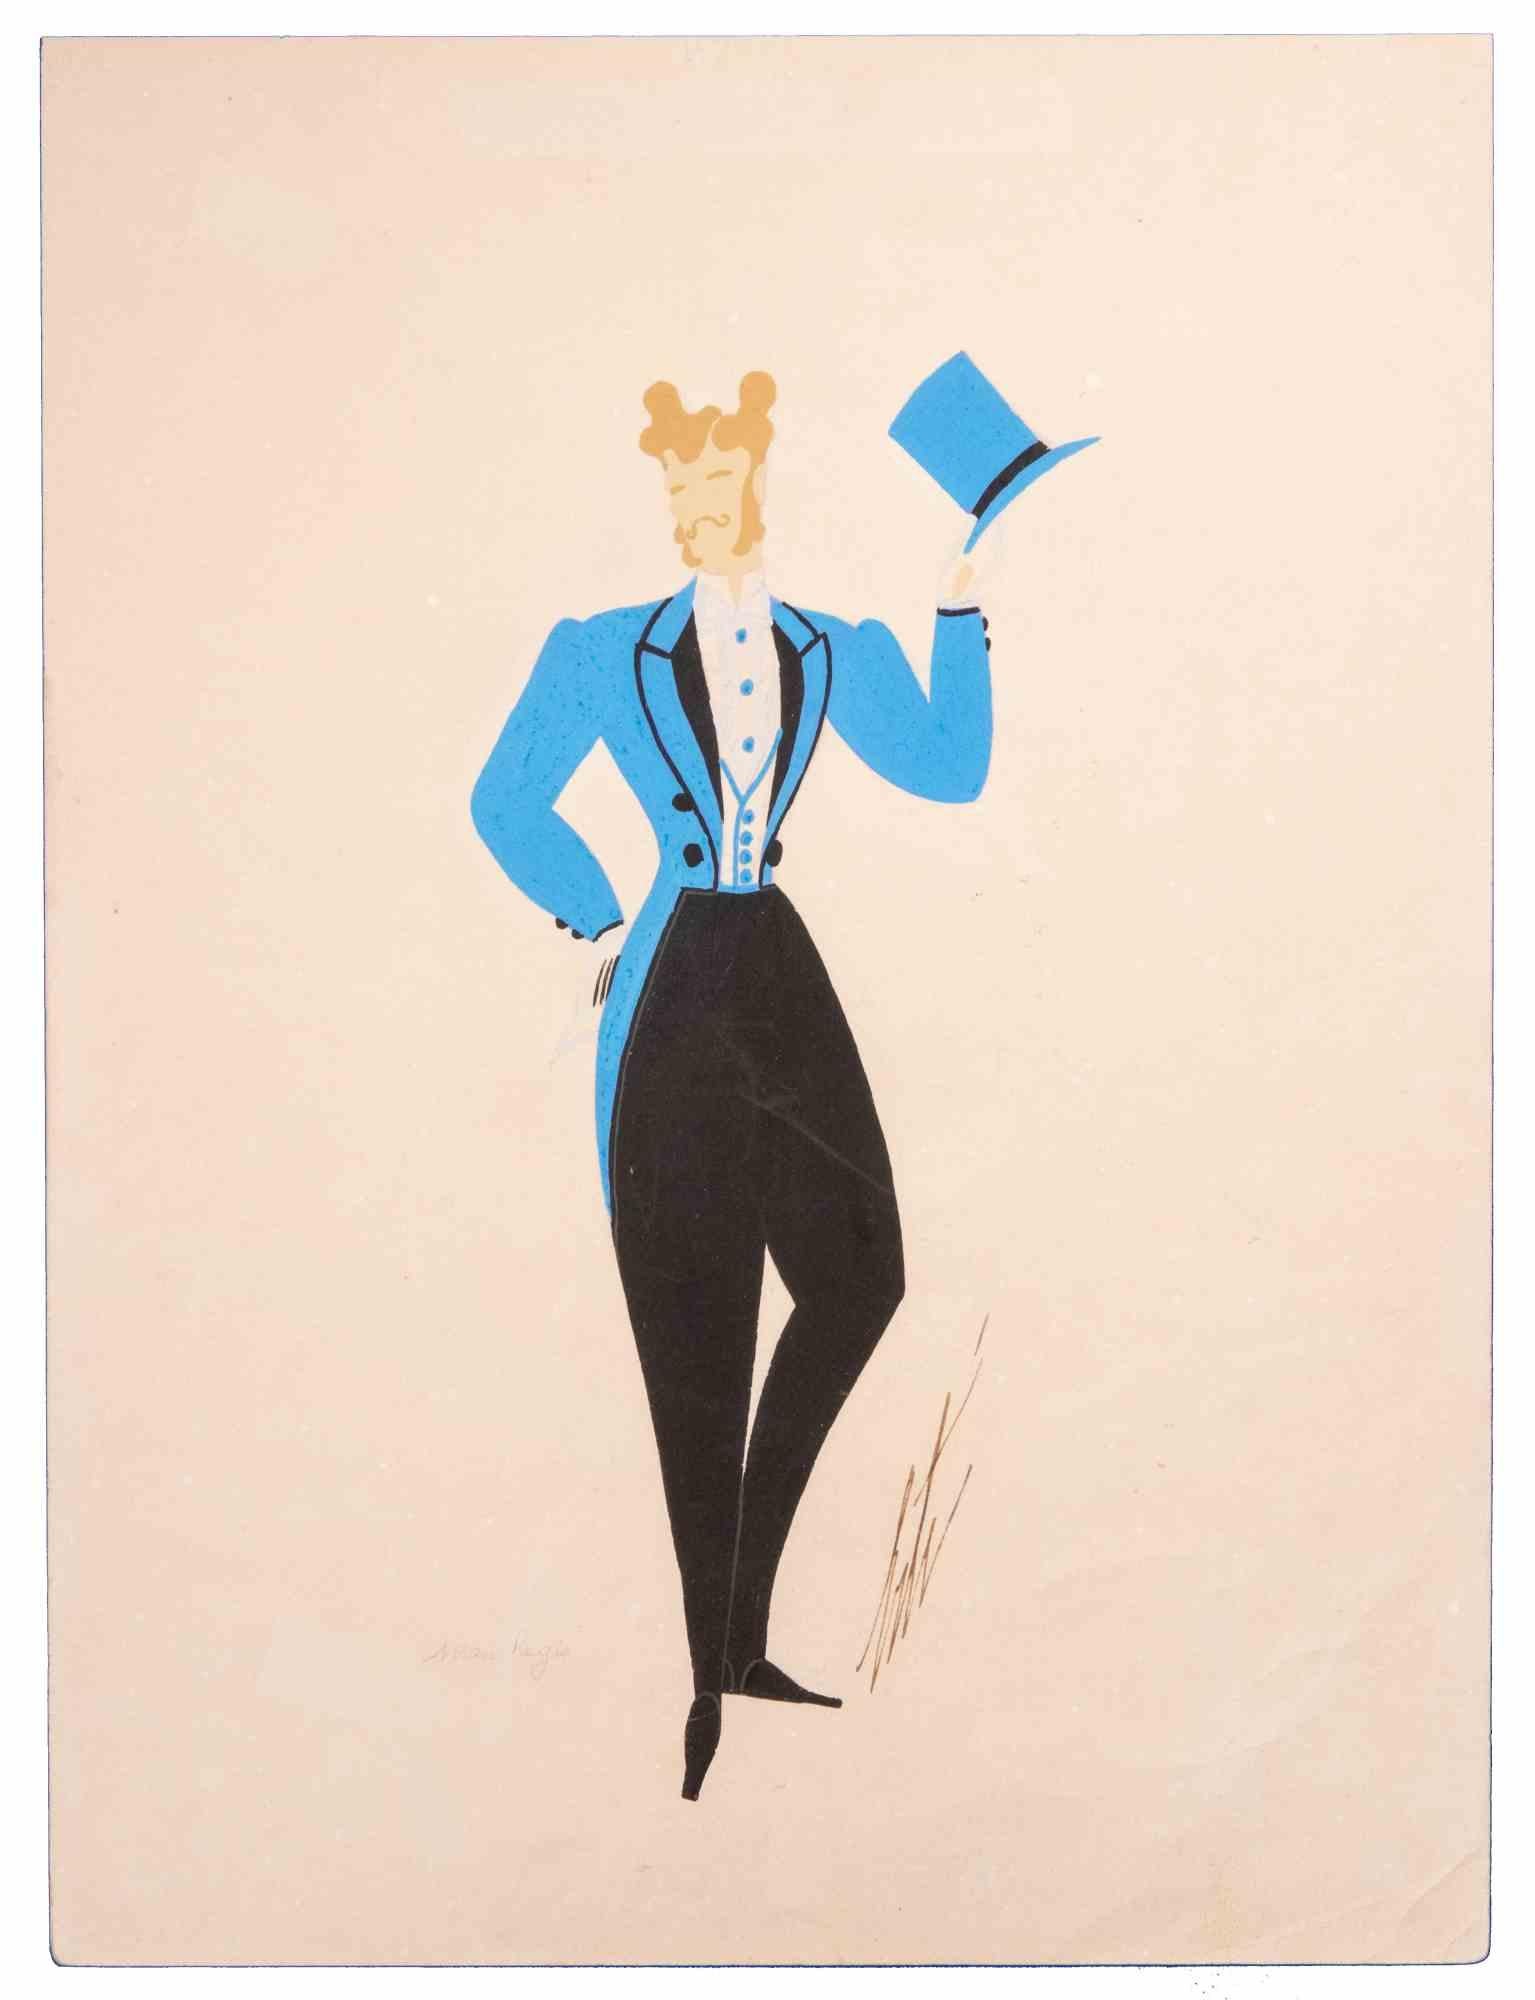 Masc Regis is a modern artwork realized in 1970s by Erté (Romain de Tirtoff).

Mixed clored tempera on paper.

Hand signed on the lower margin.

Provenance: Coll. G. Carandente, Roma. 

Romain de Tirtoff (23 November 1892 – 21 April 1990) was a